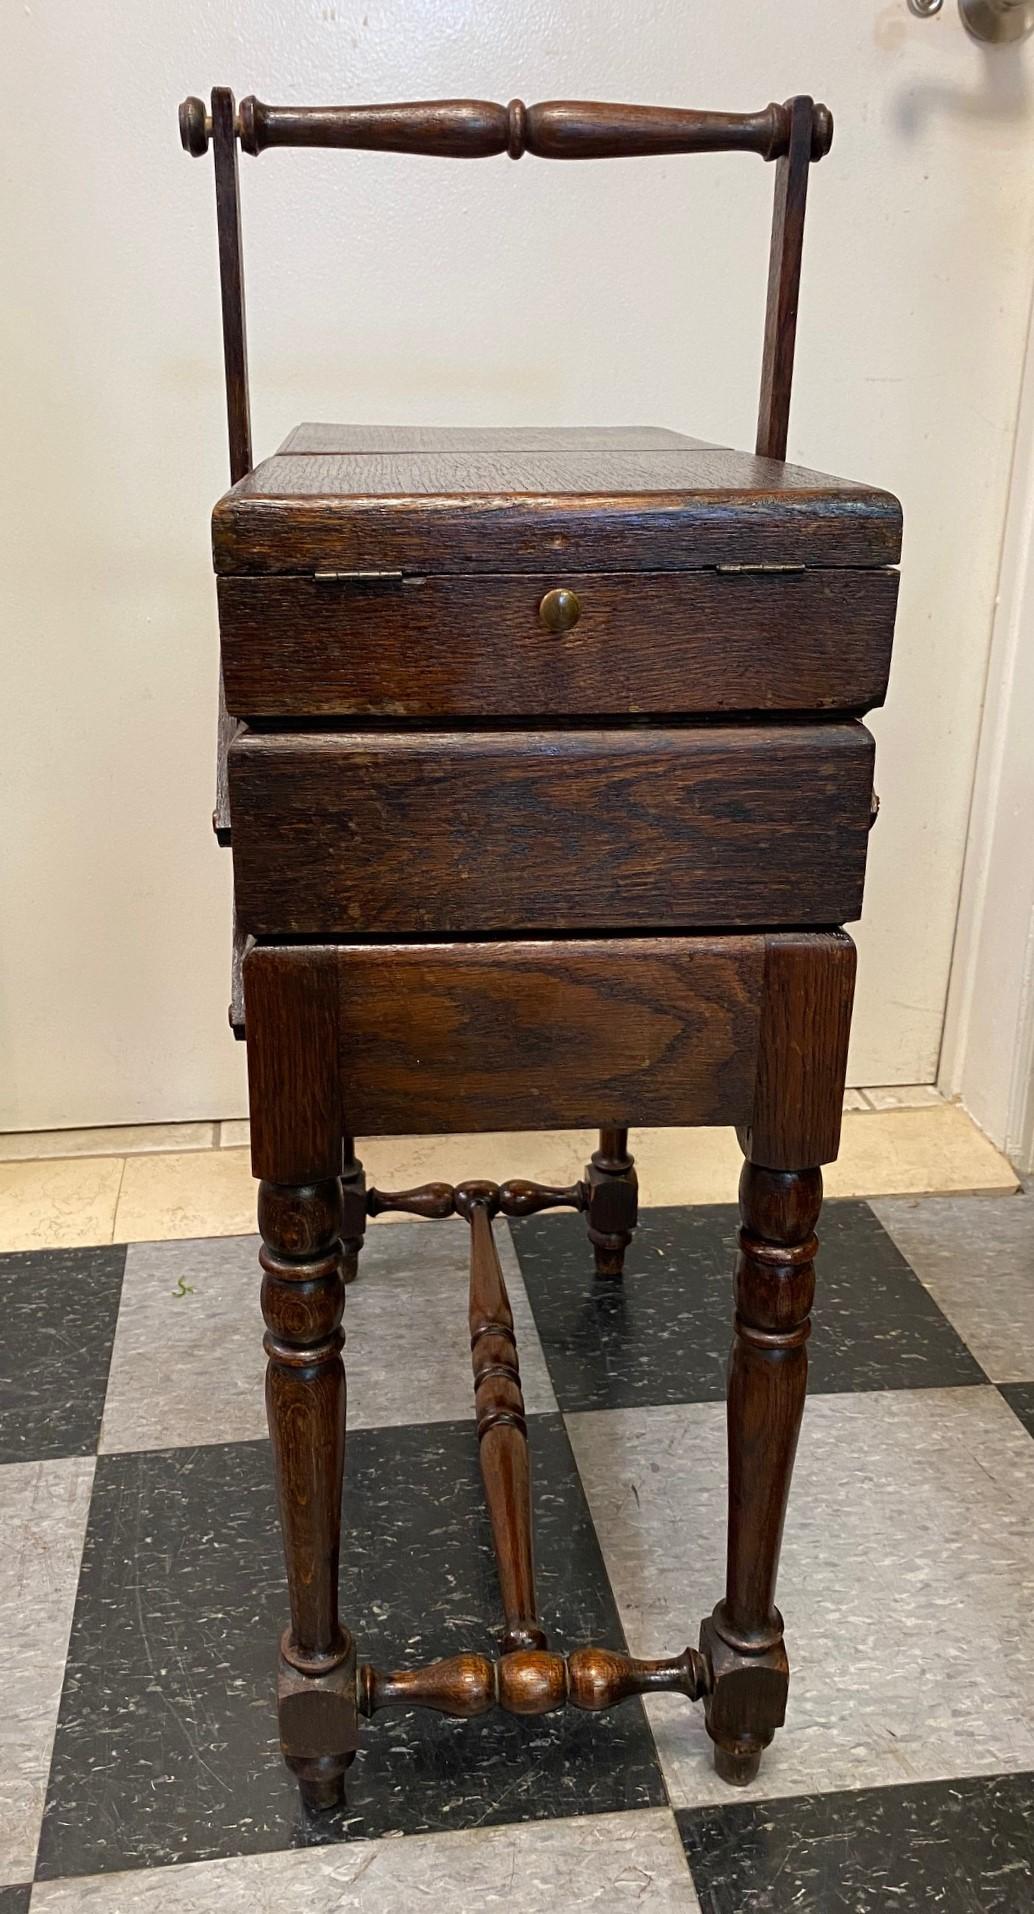 Antique wood sewing cart that opens from the top in two compartments and also opens up further to reveal lots of storage on both sides. Accordion style. Very functional and can be used to store jewelry and even other craft materials. Great